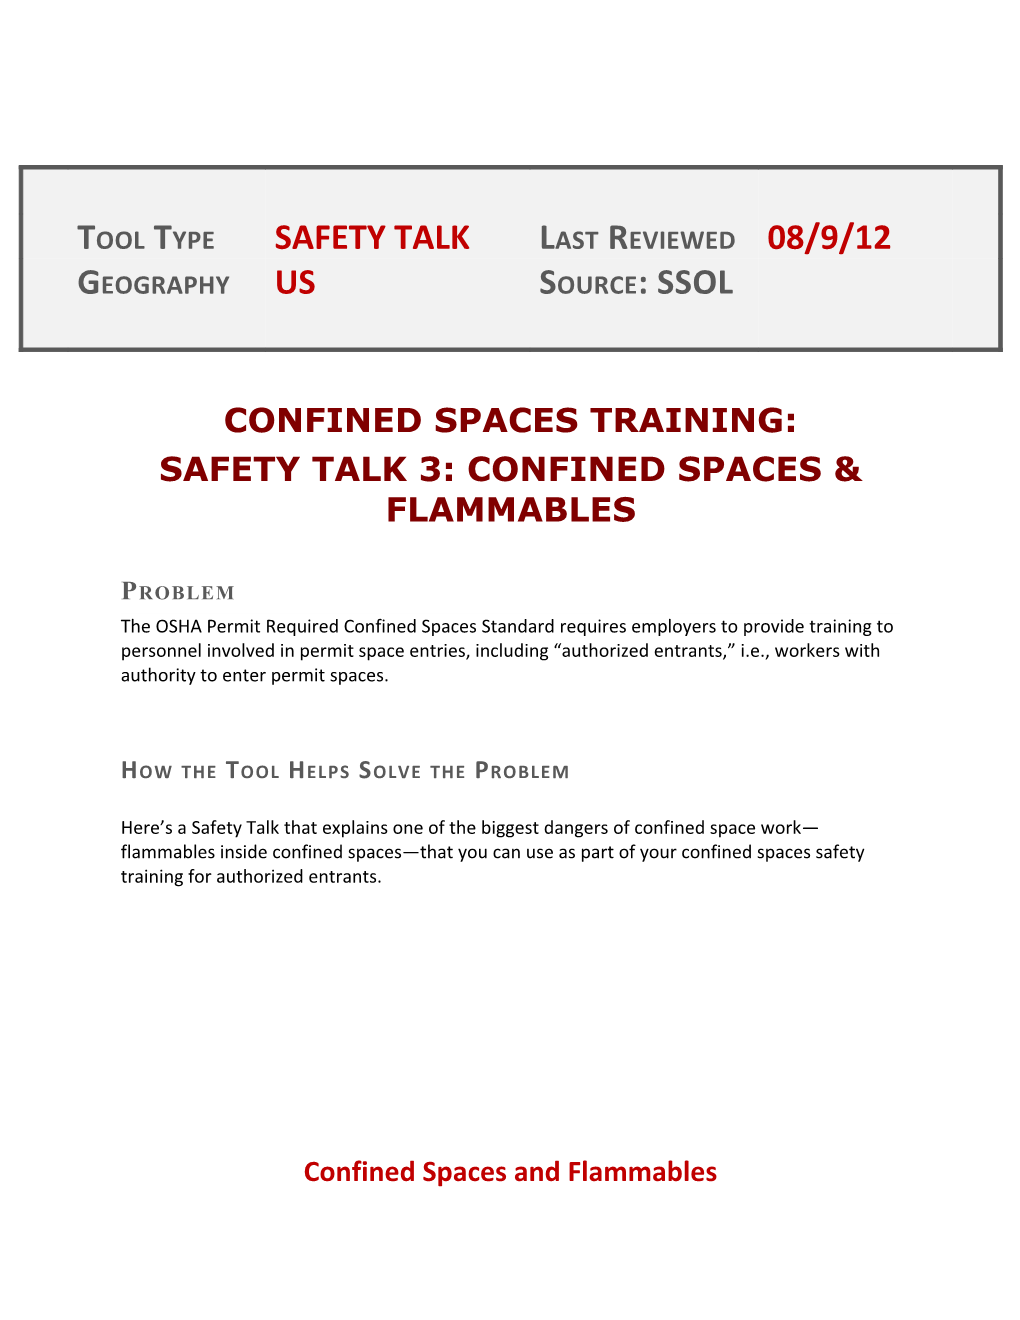 Safety Talk 3: Confined Spaces & Flammables